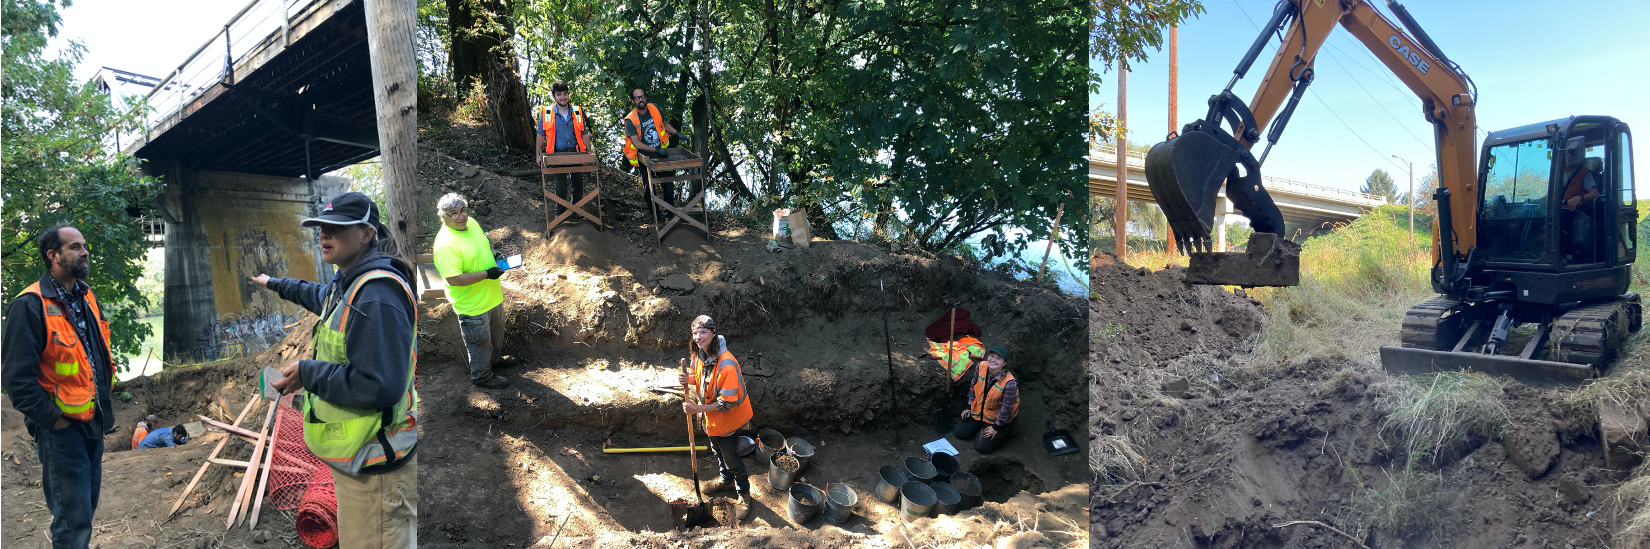 Corvallis archaeology dig.png